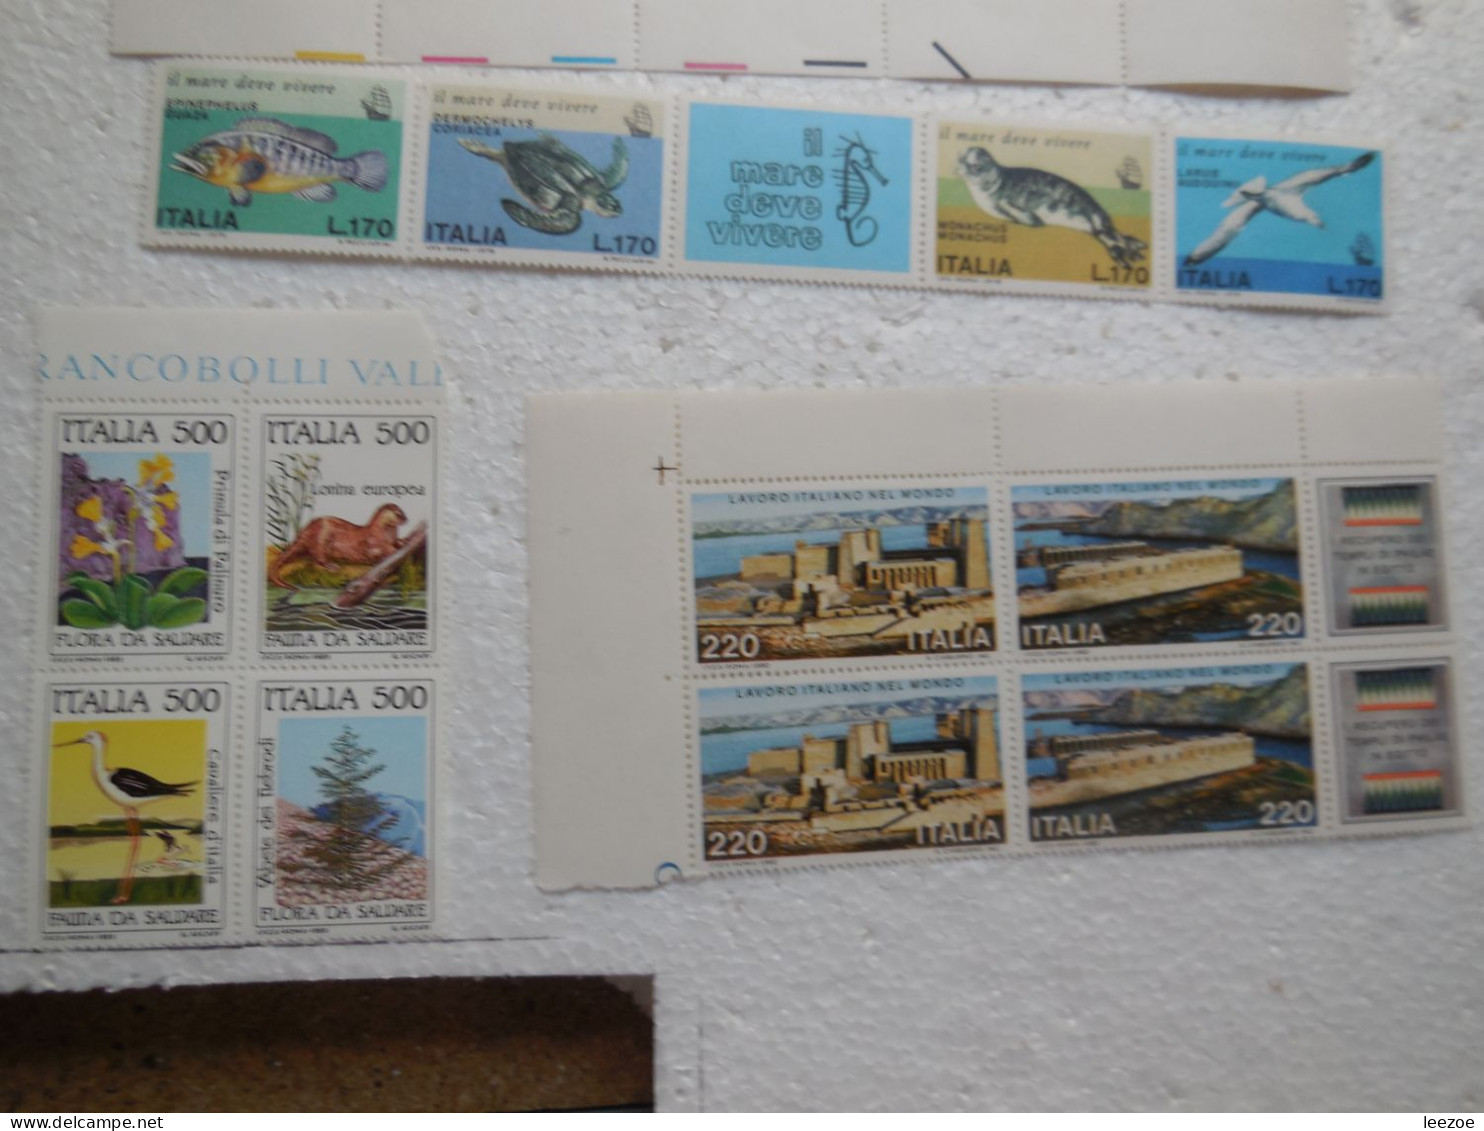 STAMP ITALIA, lot TIMBRES ITALIEN, timbres catégorie portrait art animaux...  ...ref N5/40/8